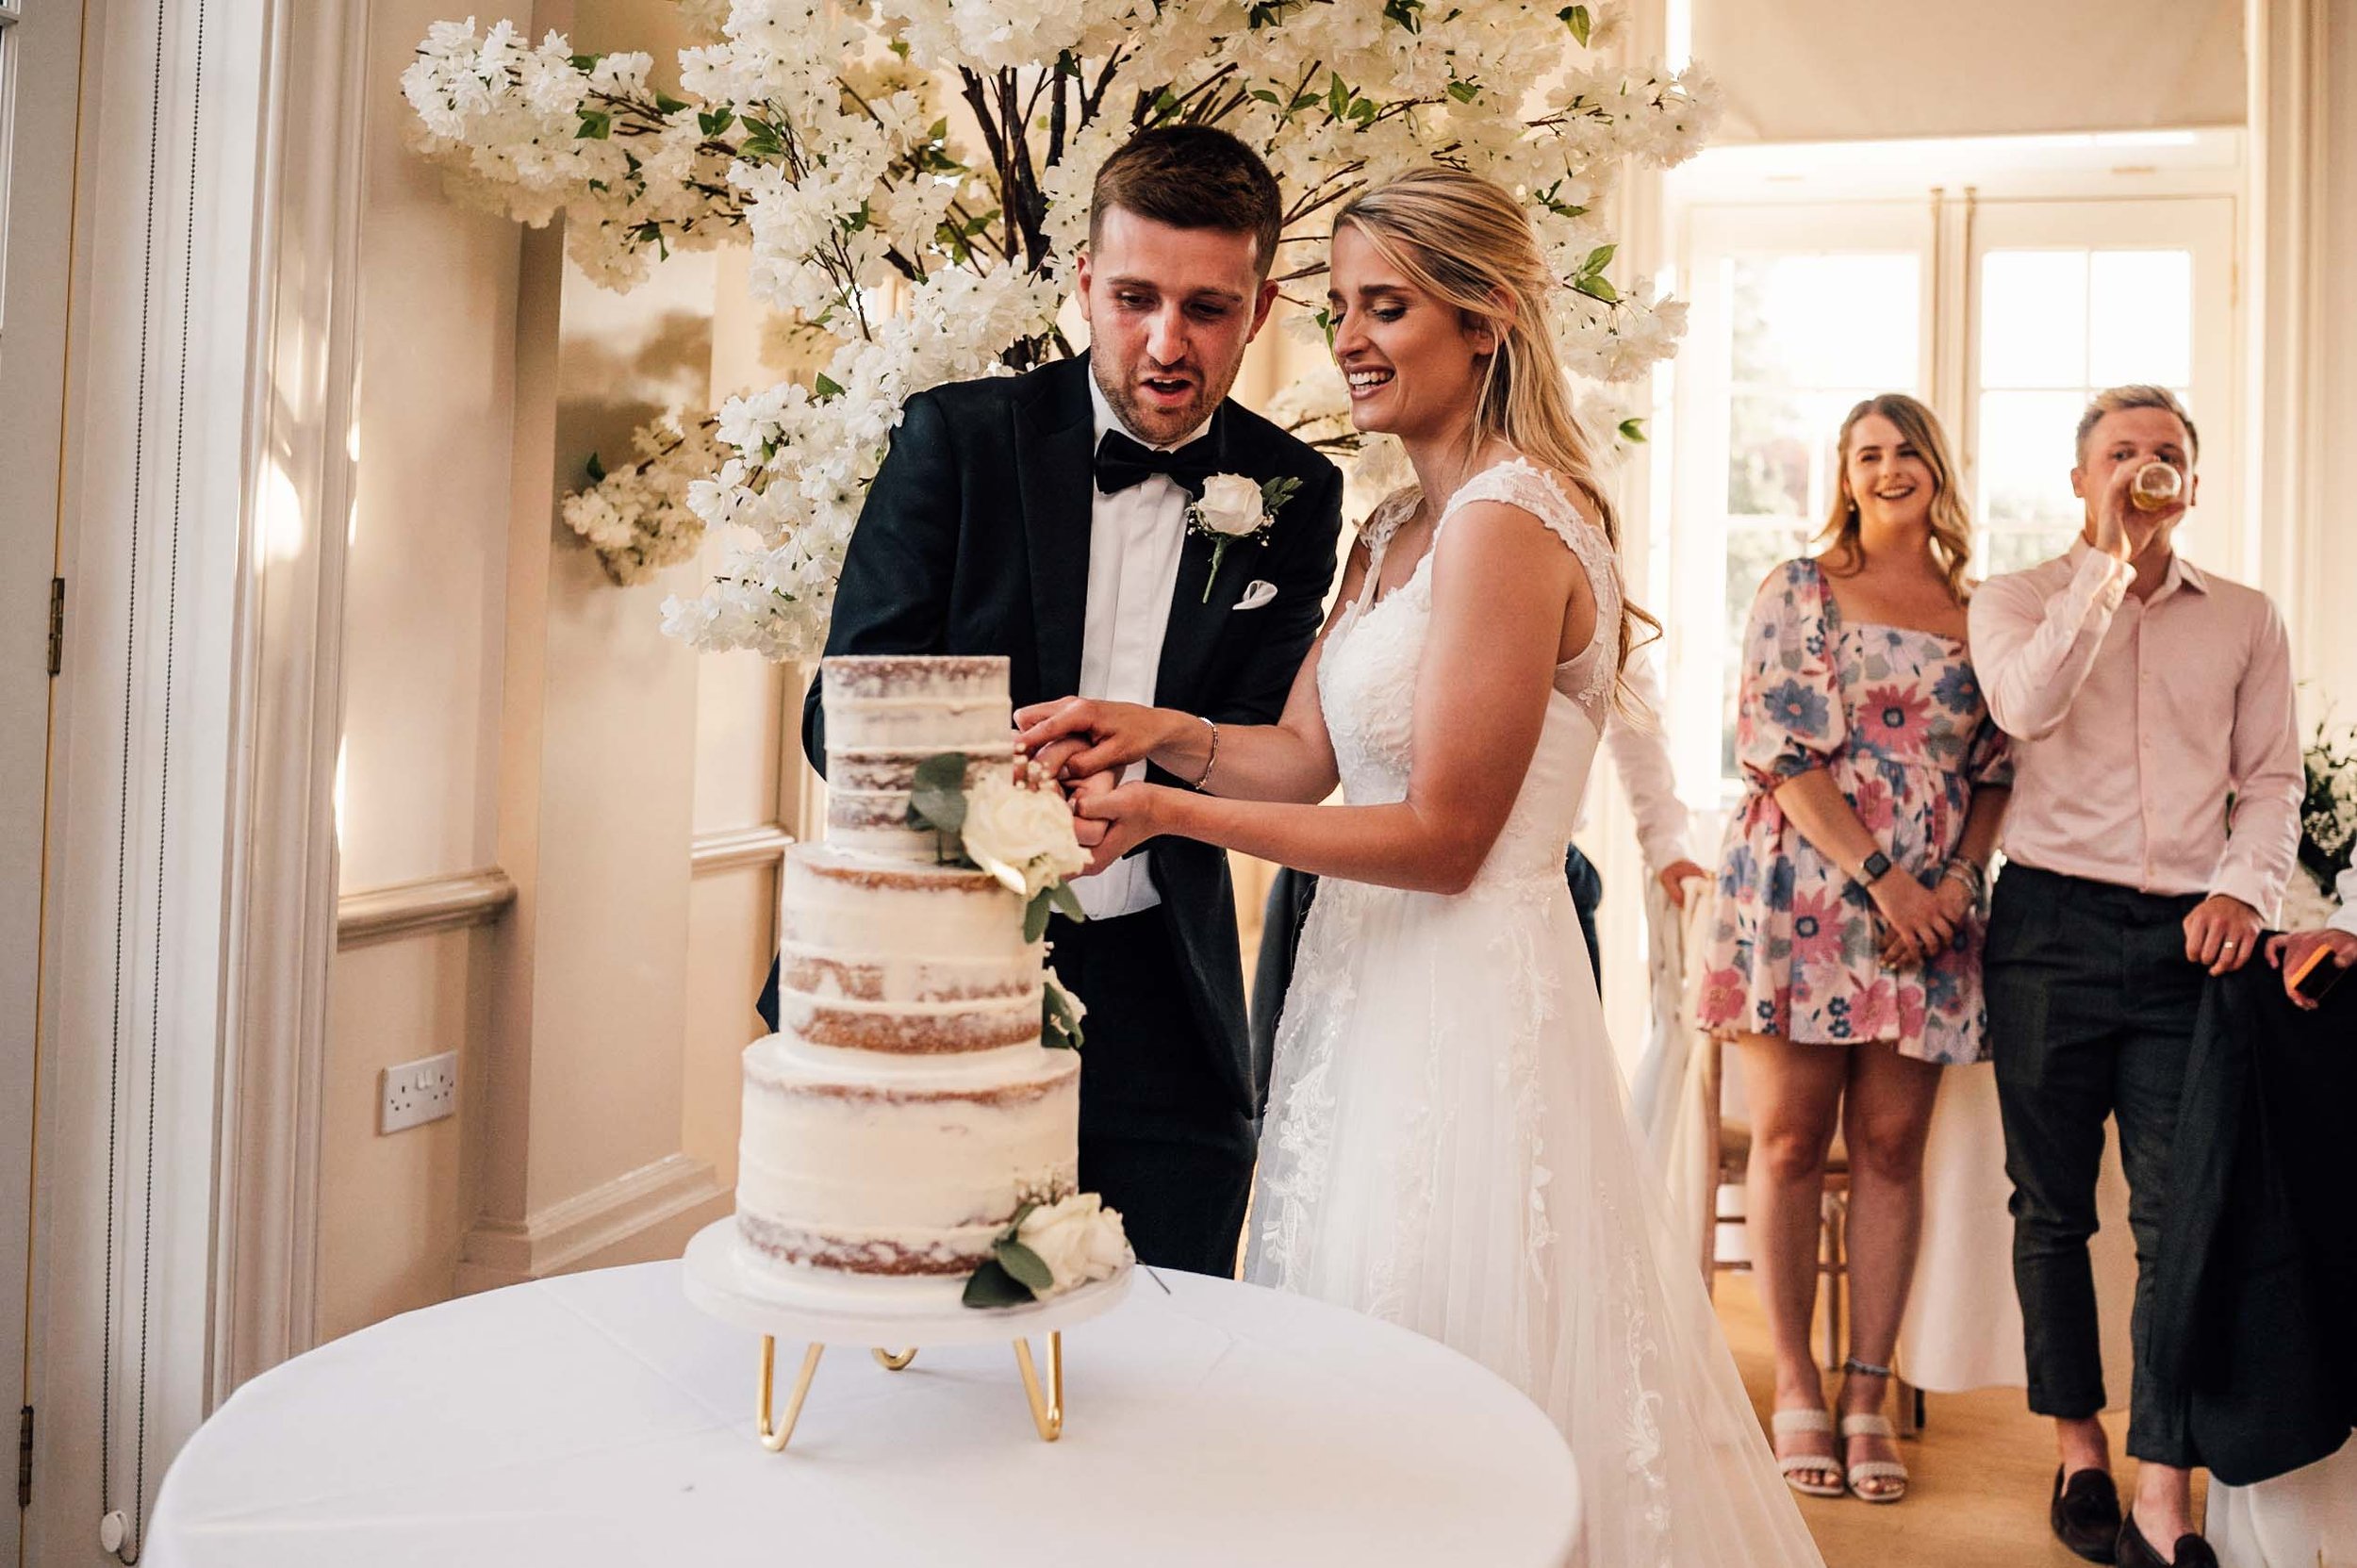 Bride and groom cutting the cake at Hodsock Priory